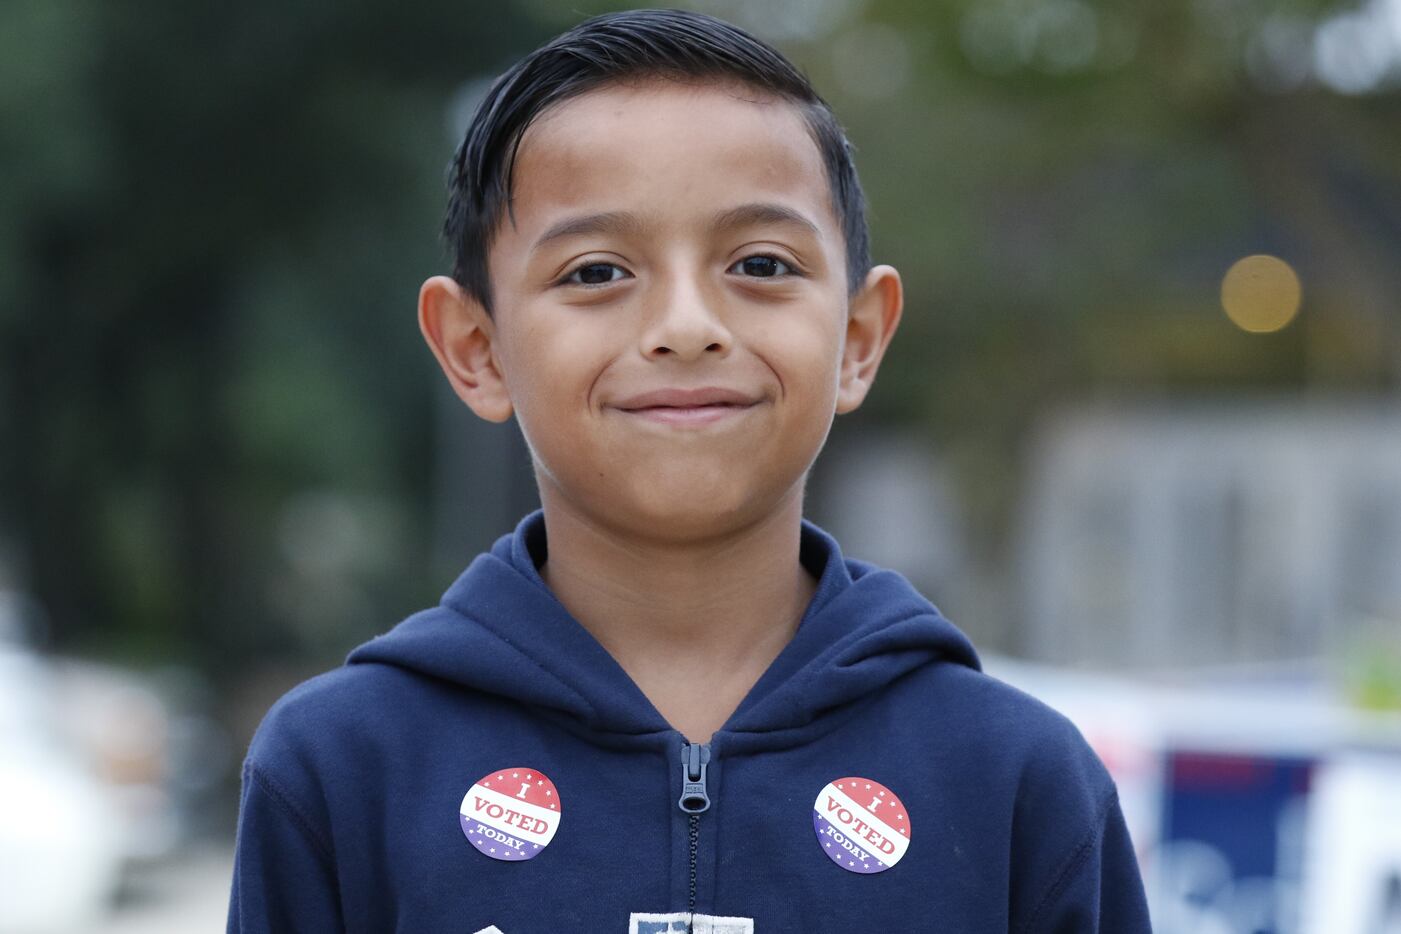 Nathan Cruz, 8, is all smiles after watching his father Sergio Cruz vote early at the Dallas...